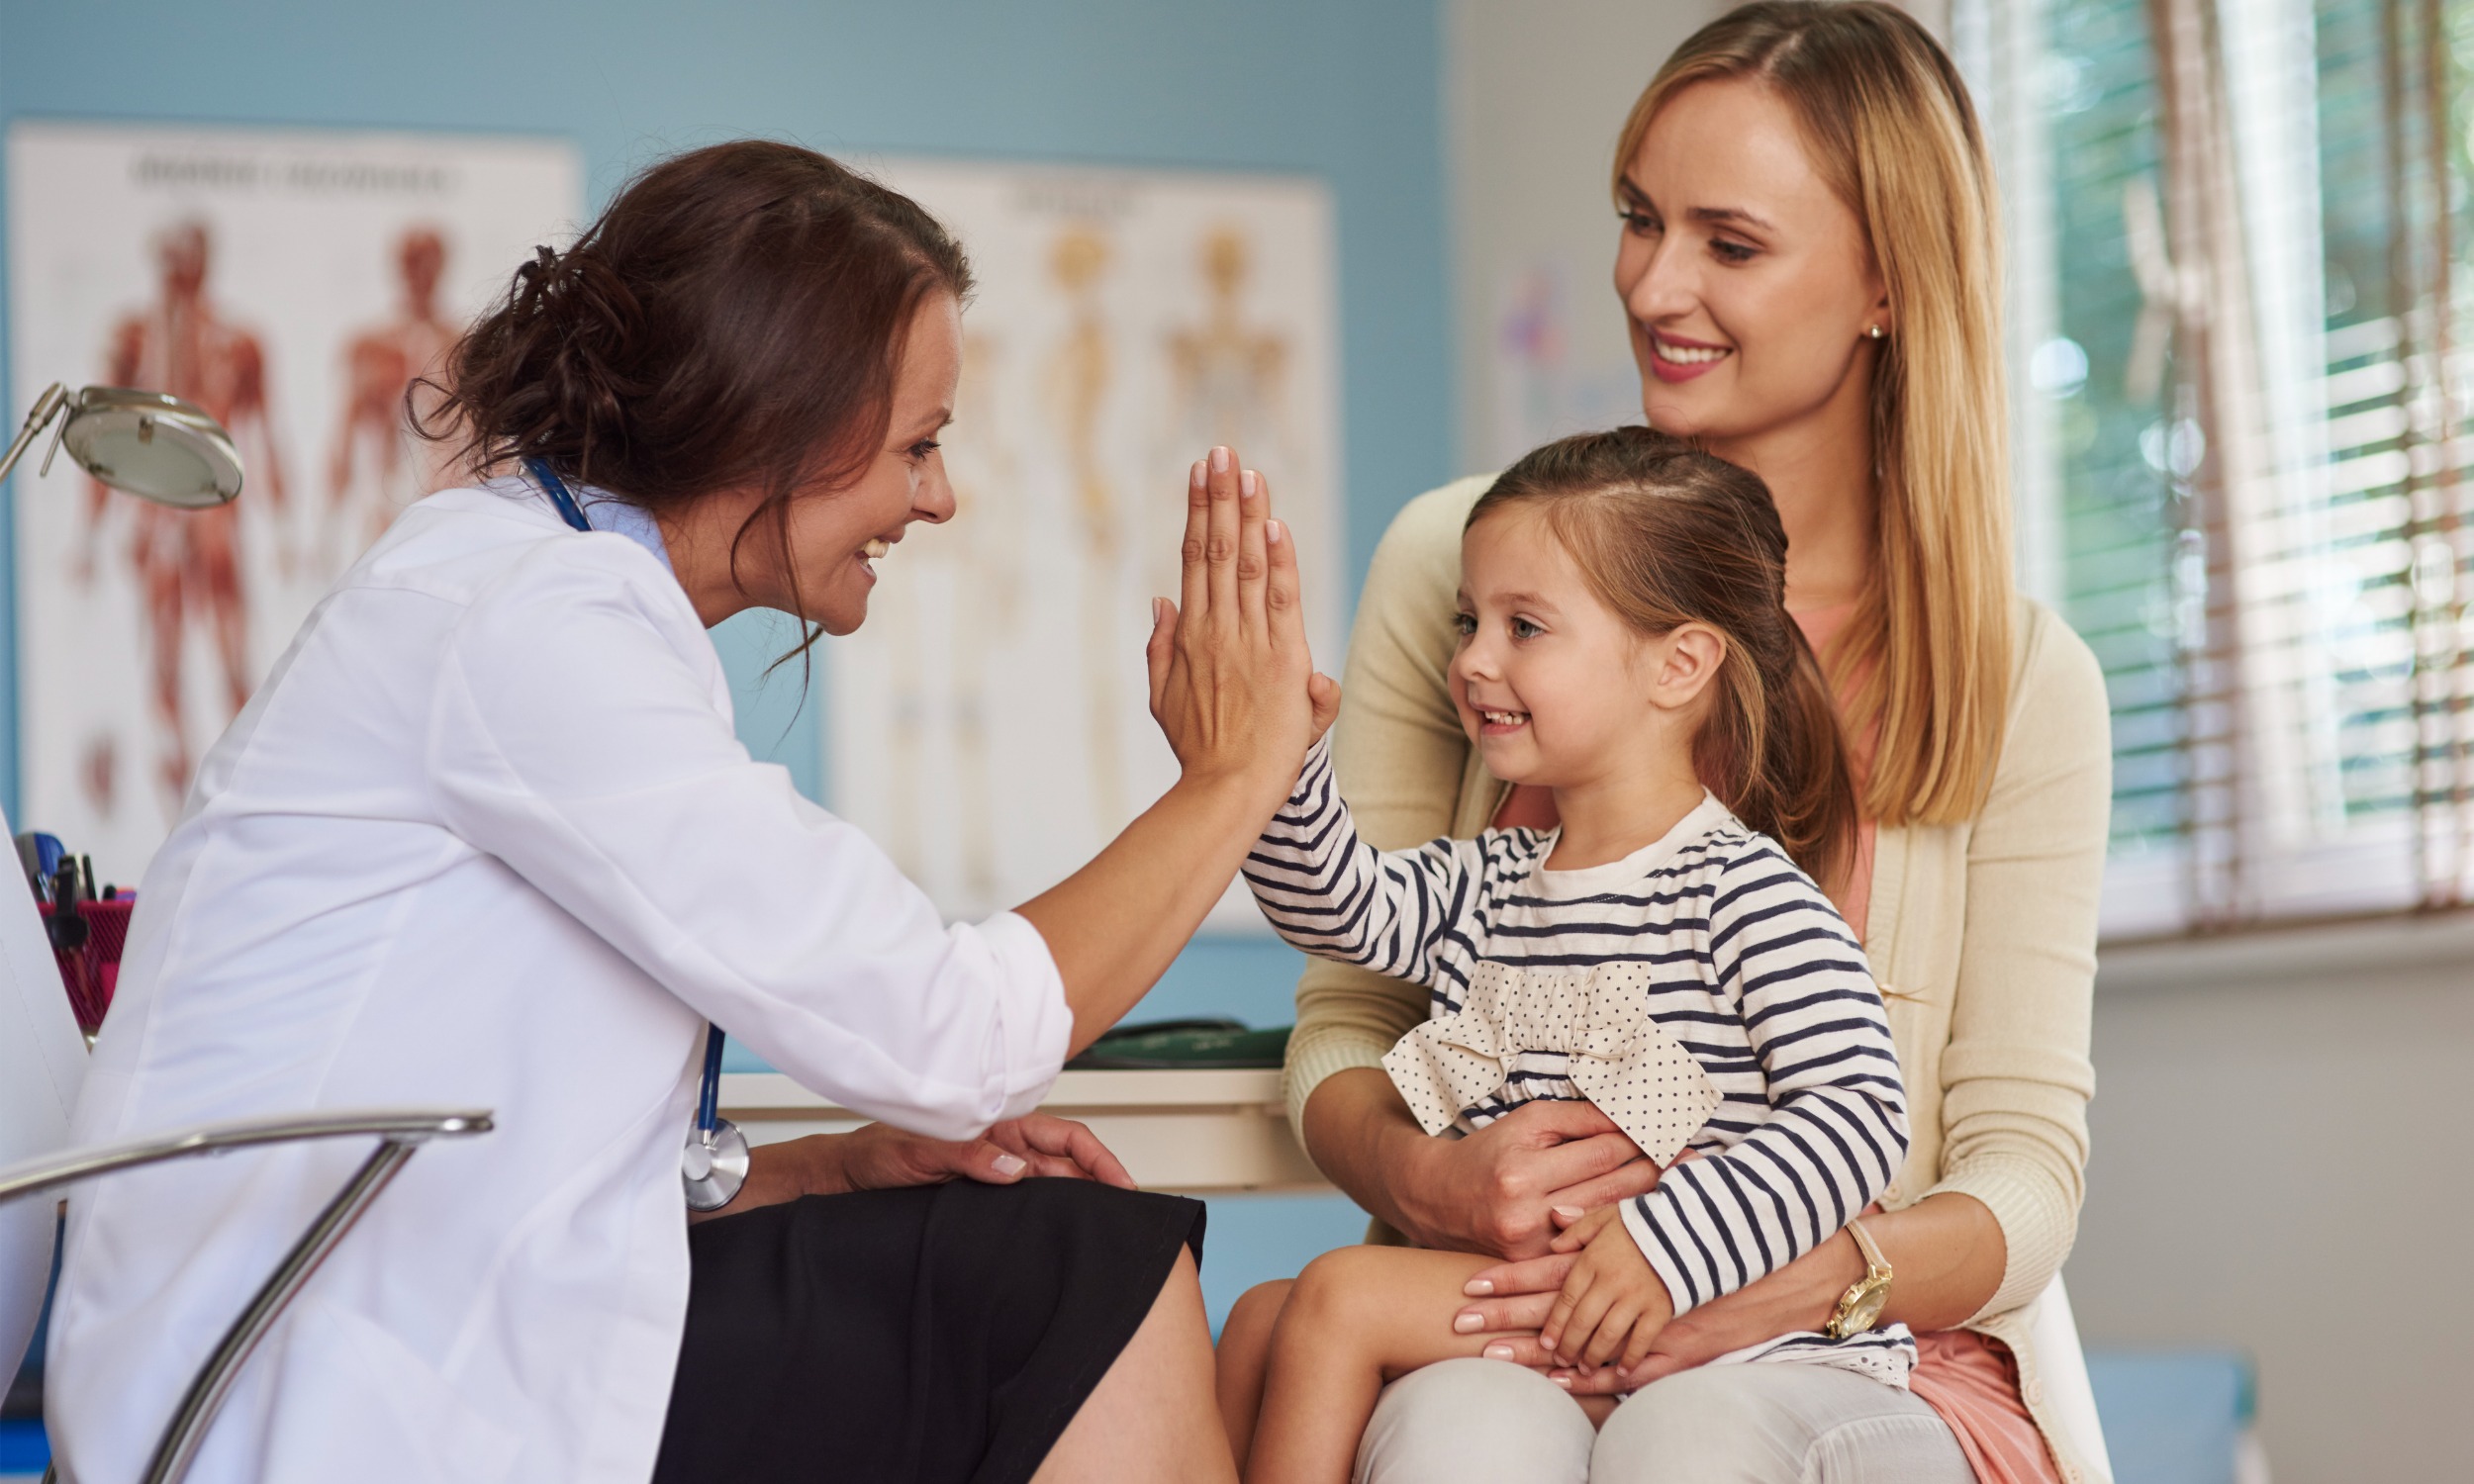 Importance-of-annual-pediatric-appointments